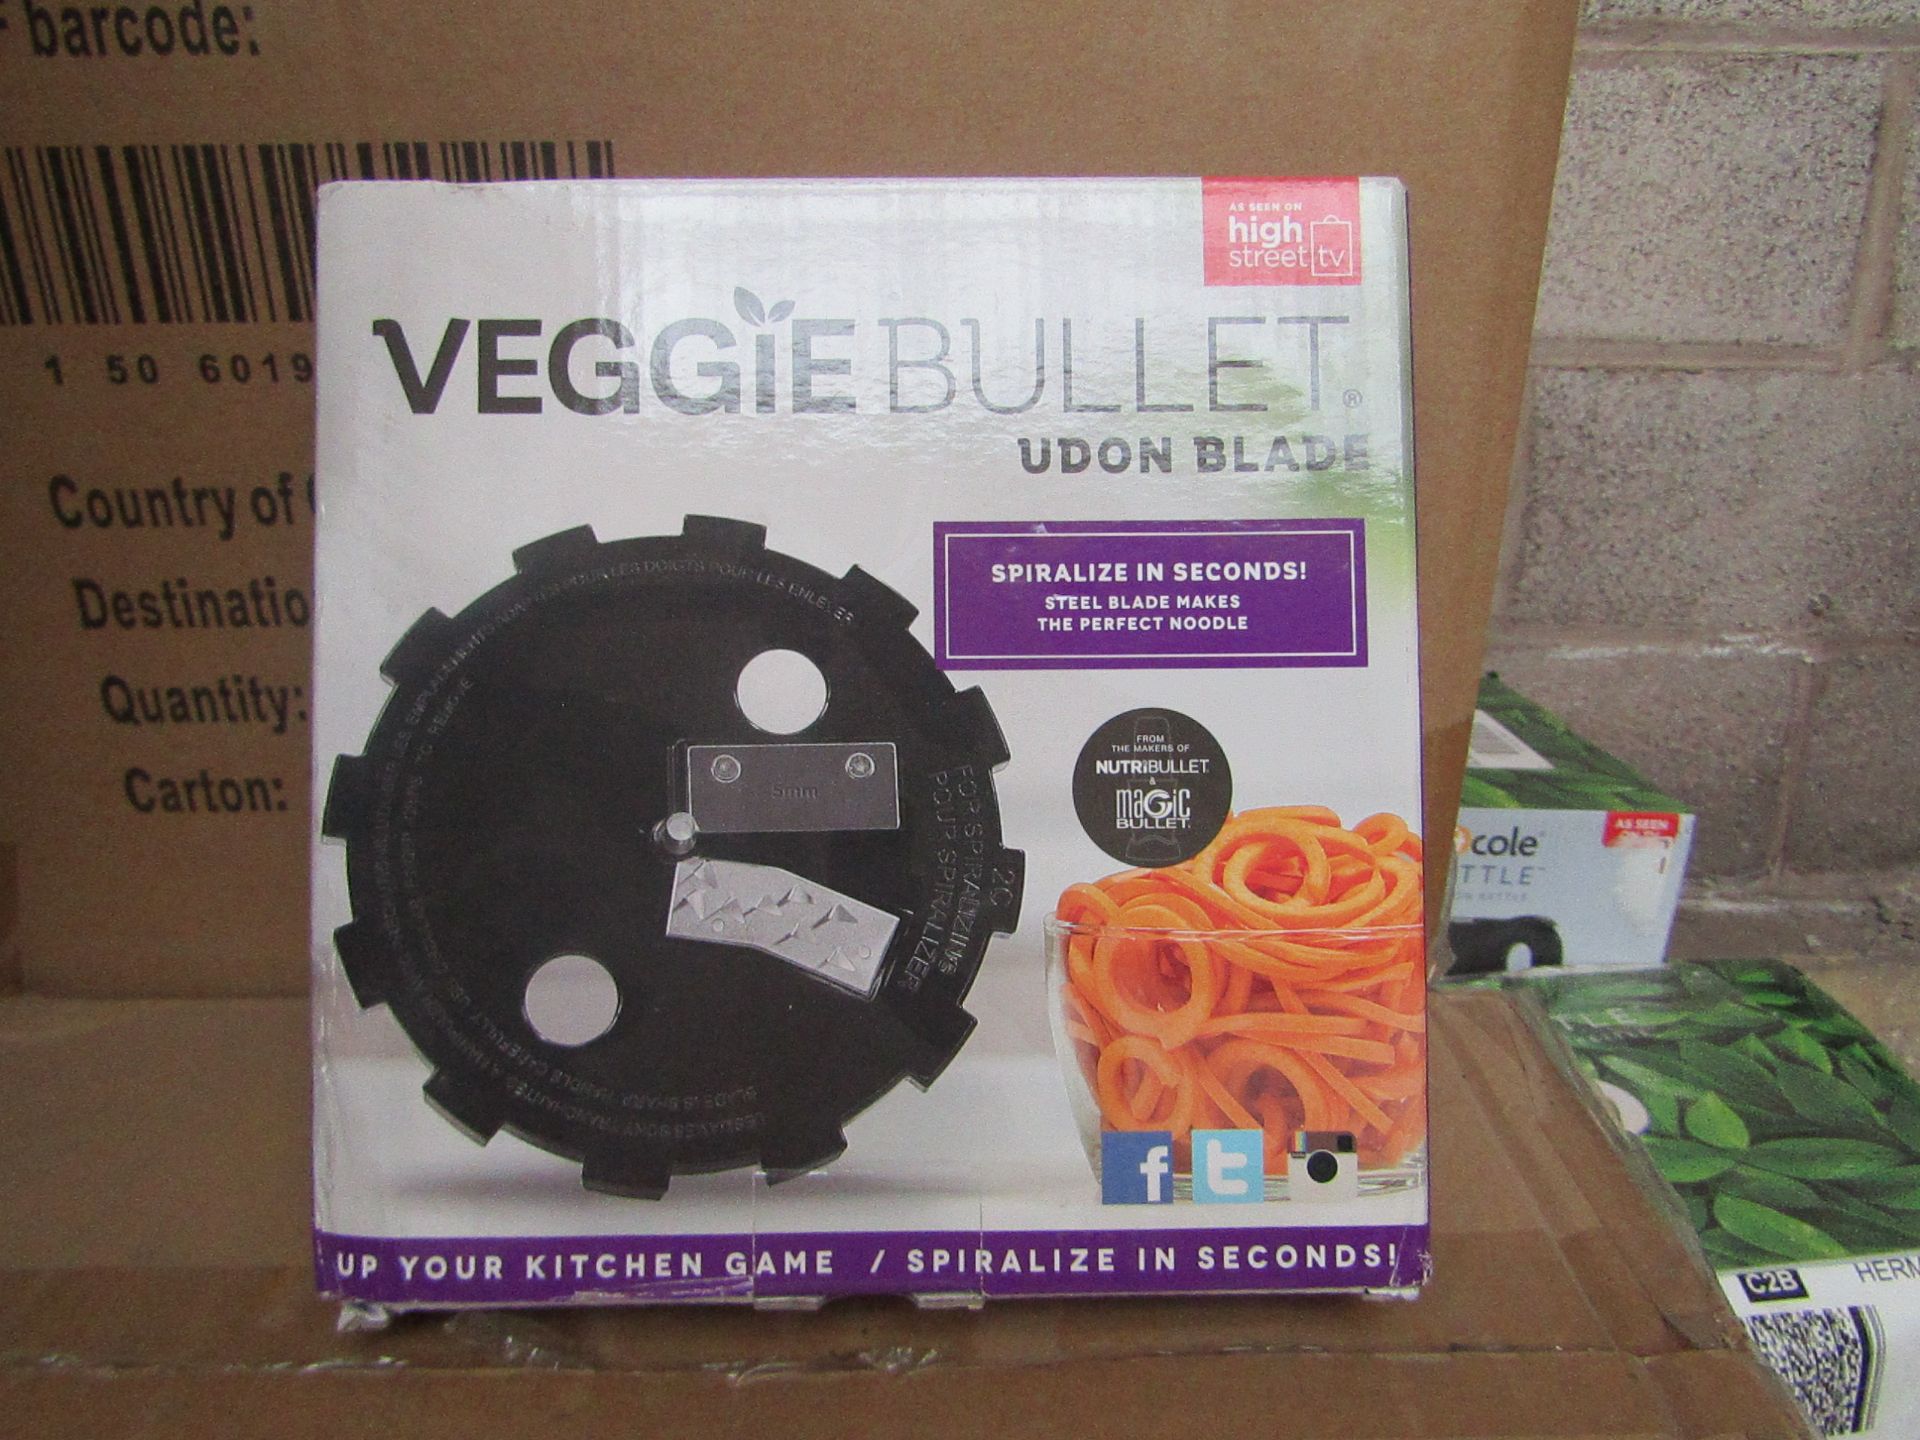 | 1X | BOX CONTAINING 20 UNITS OF 14 VEGGIE BULLET RIBBON BLADES | NEW AND BOXED | NO ONLINE